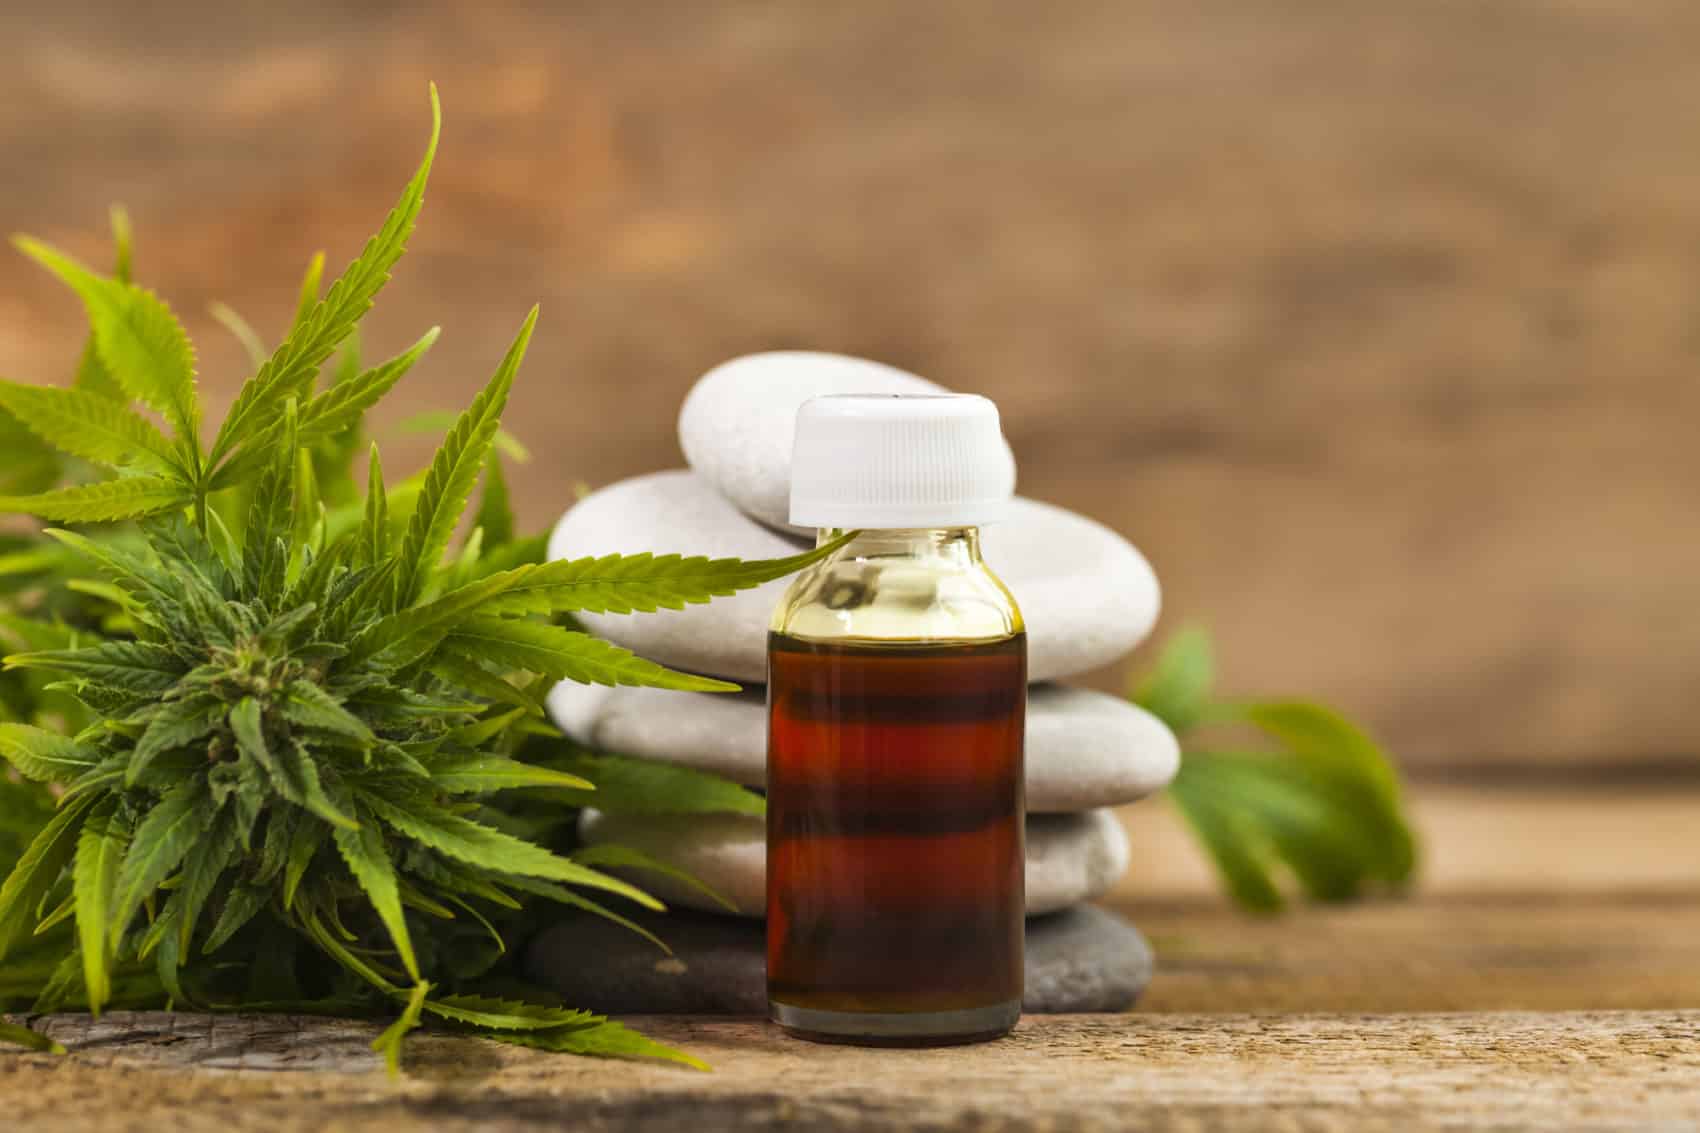 Here’s What You Need to Know about CBD